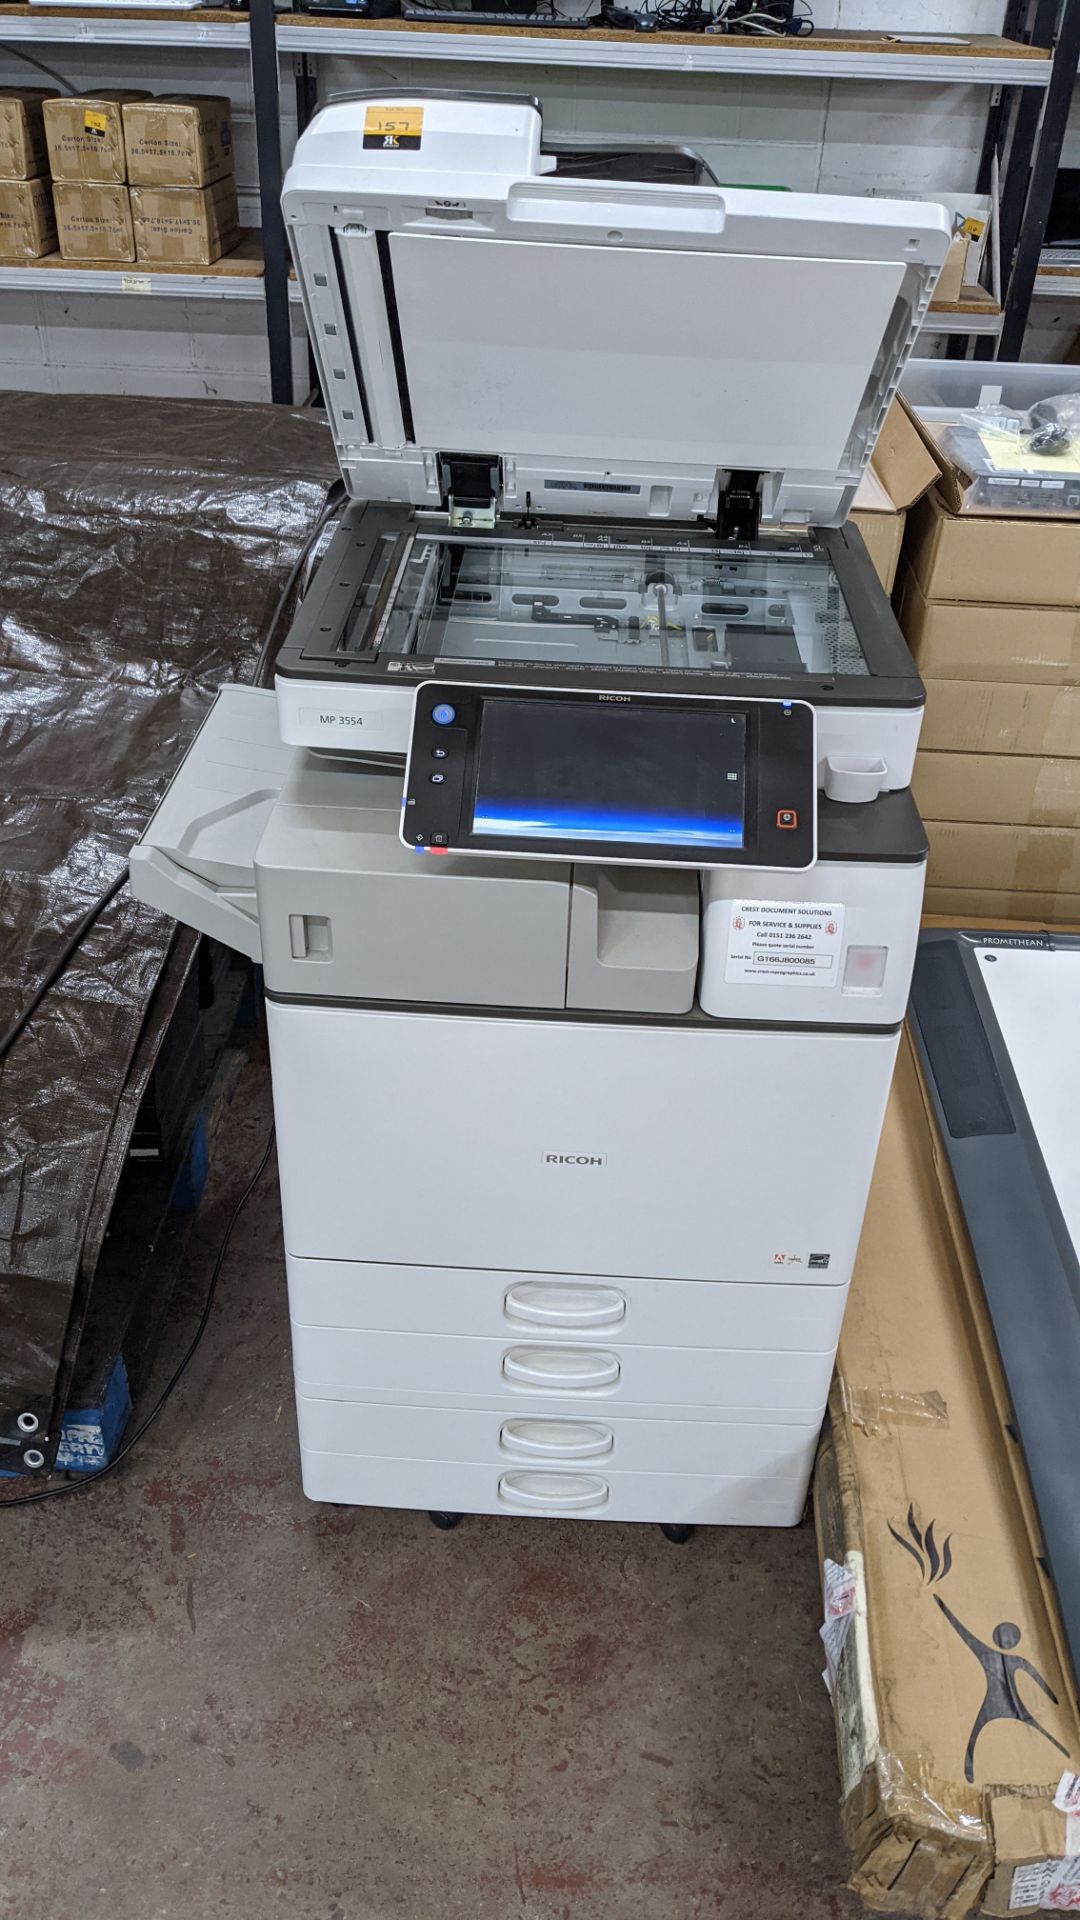 Ricoh model MP3554 floor standing multifunction copier with ADF, large touchscreen display, finishin - Image 3 of 12